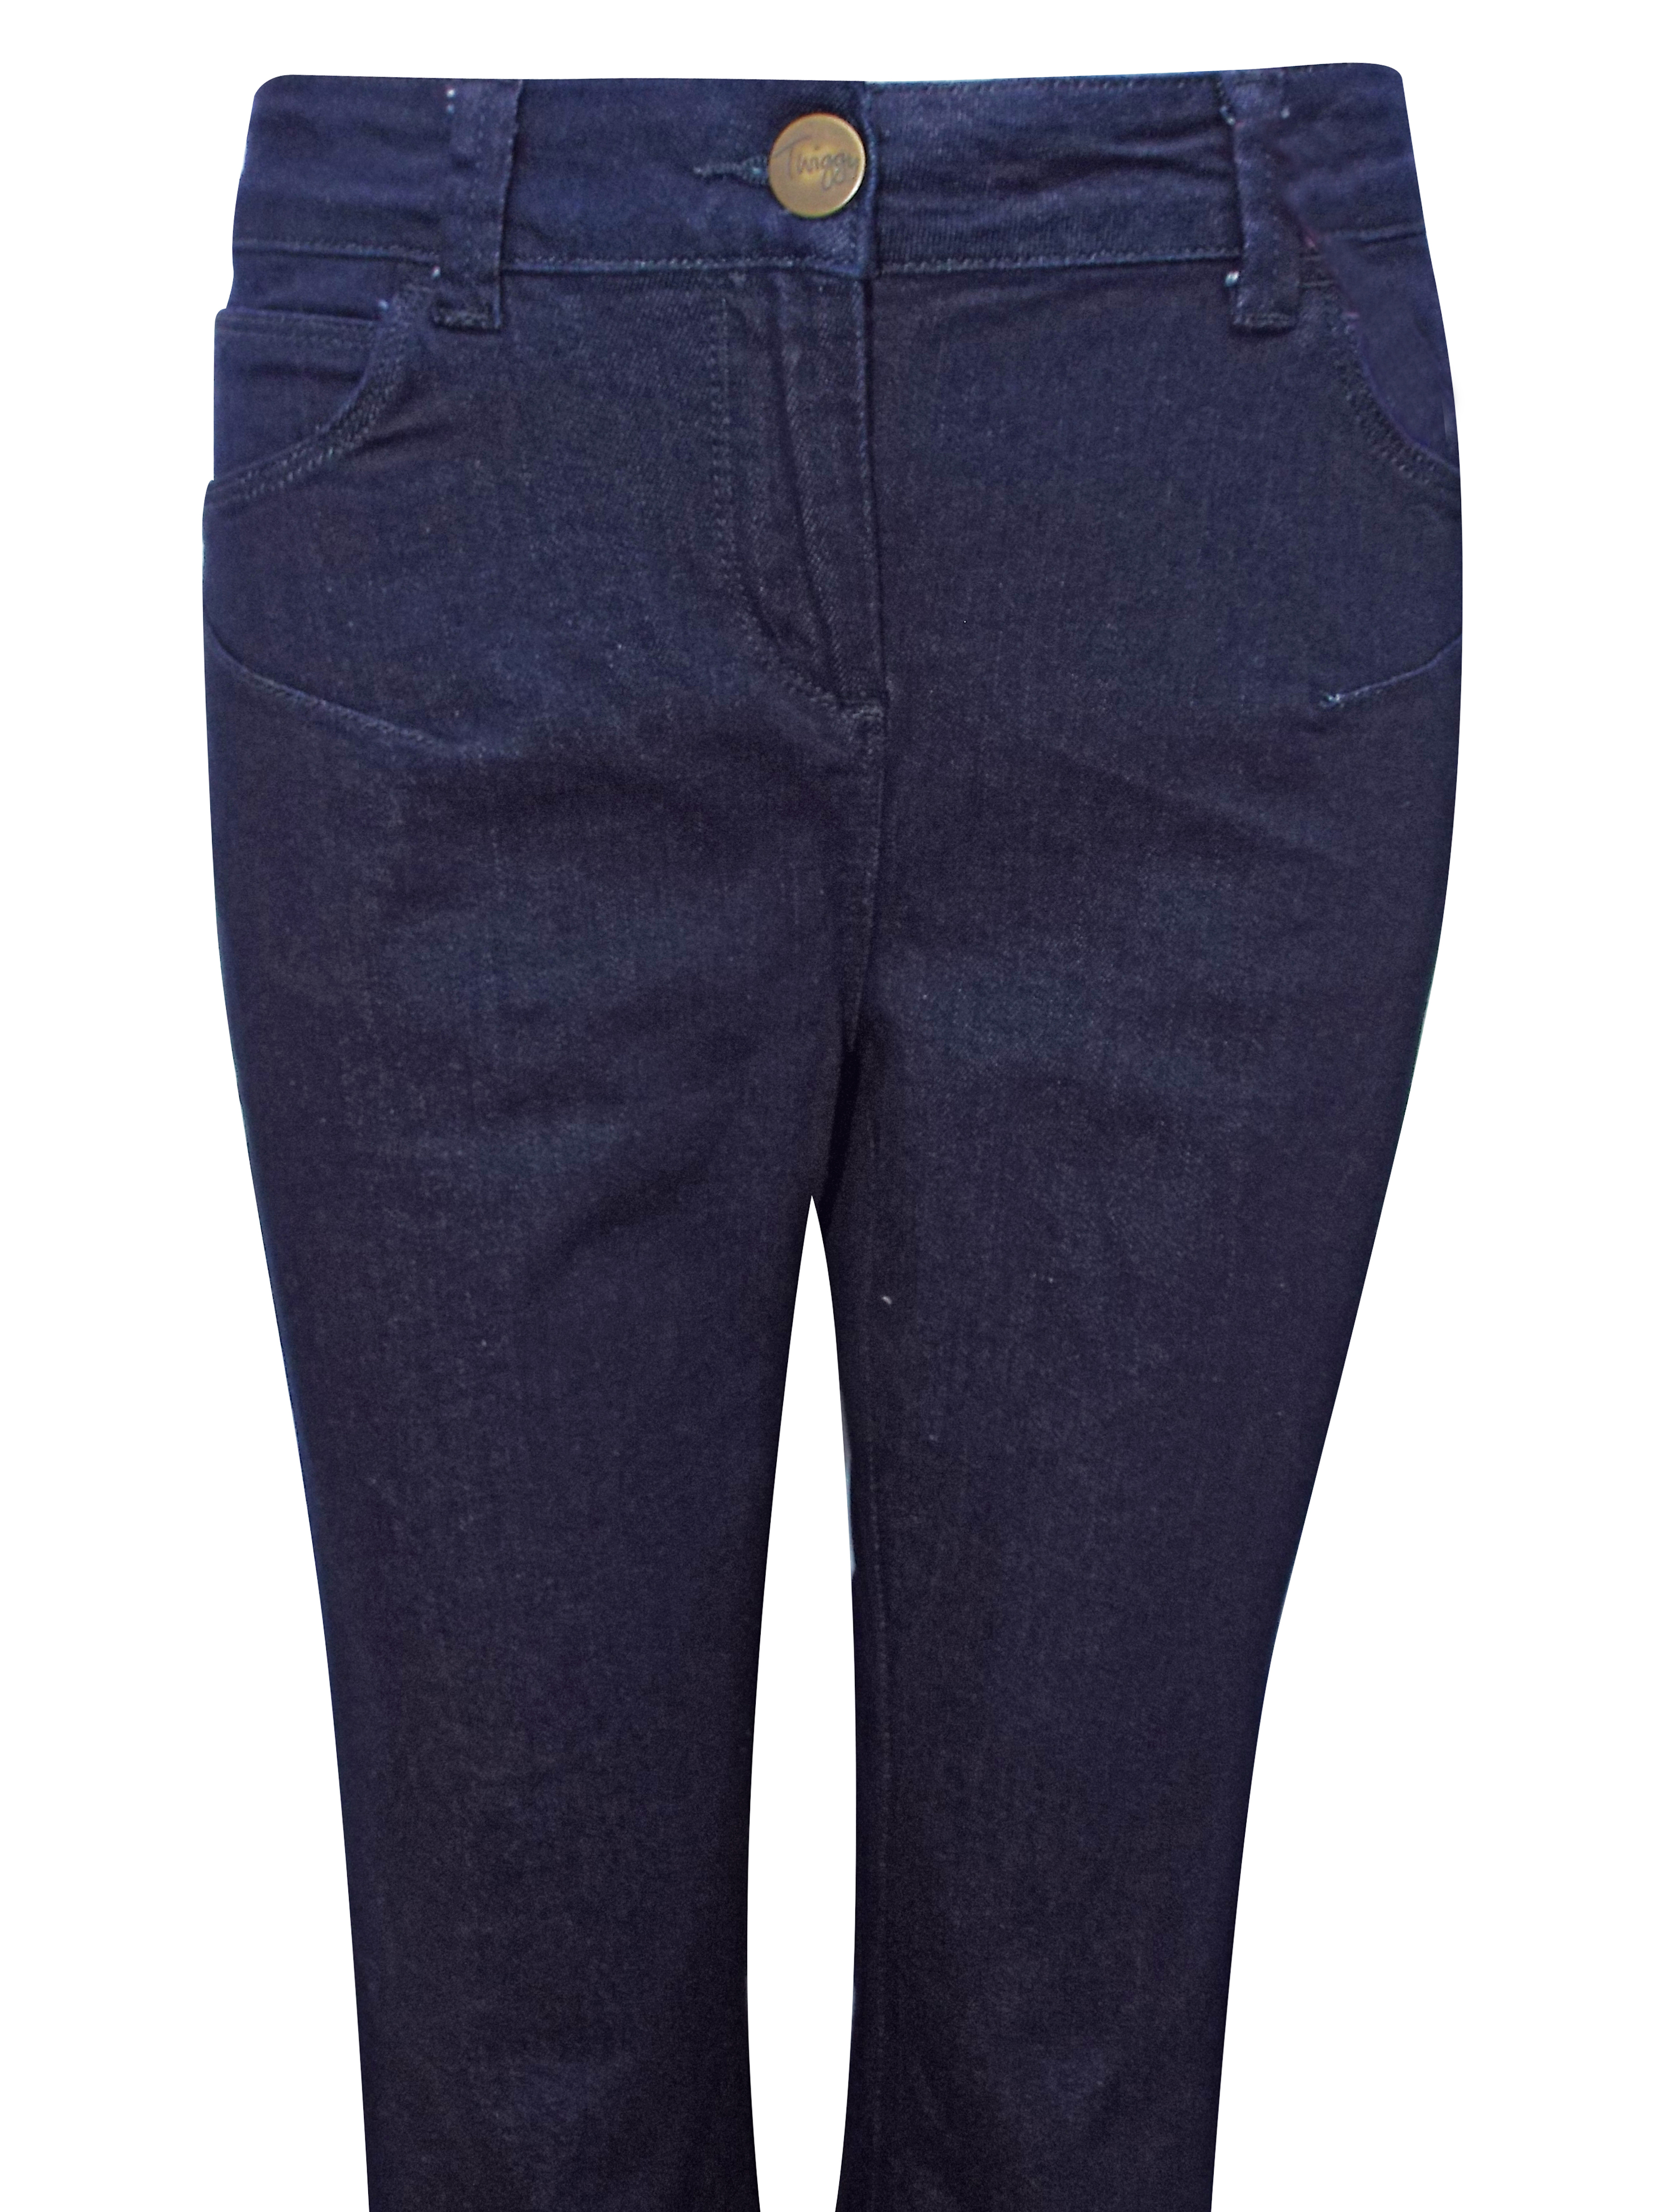 Marks and Spencer - - M&5 Tw1ggy DENIM Cotton Blend Bootleg Jeans ...